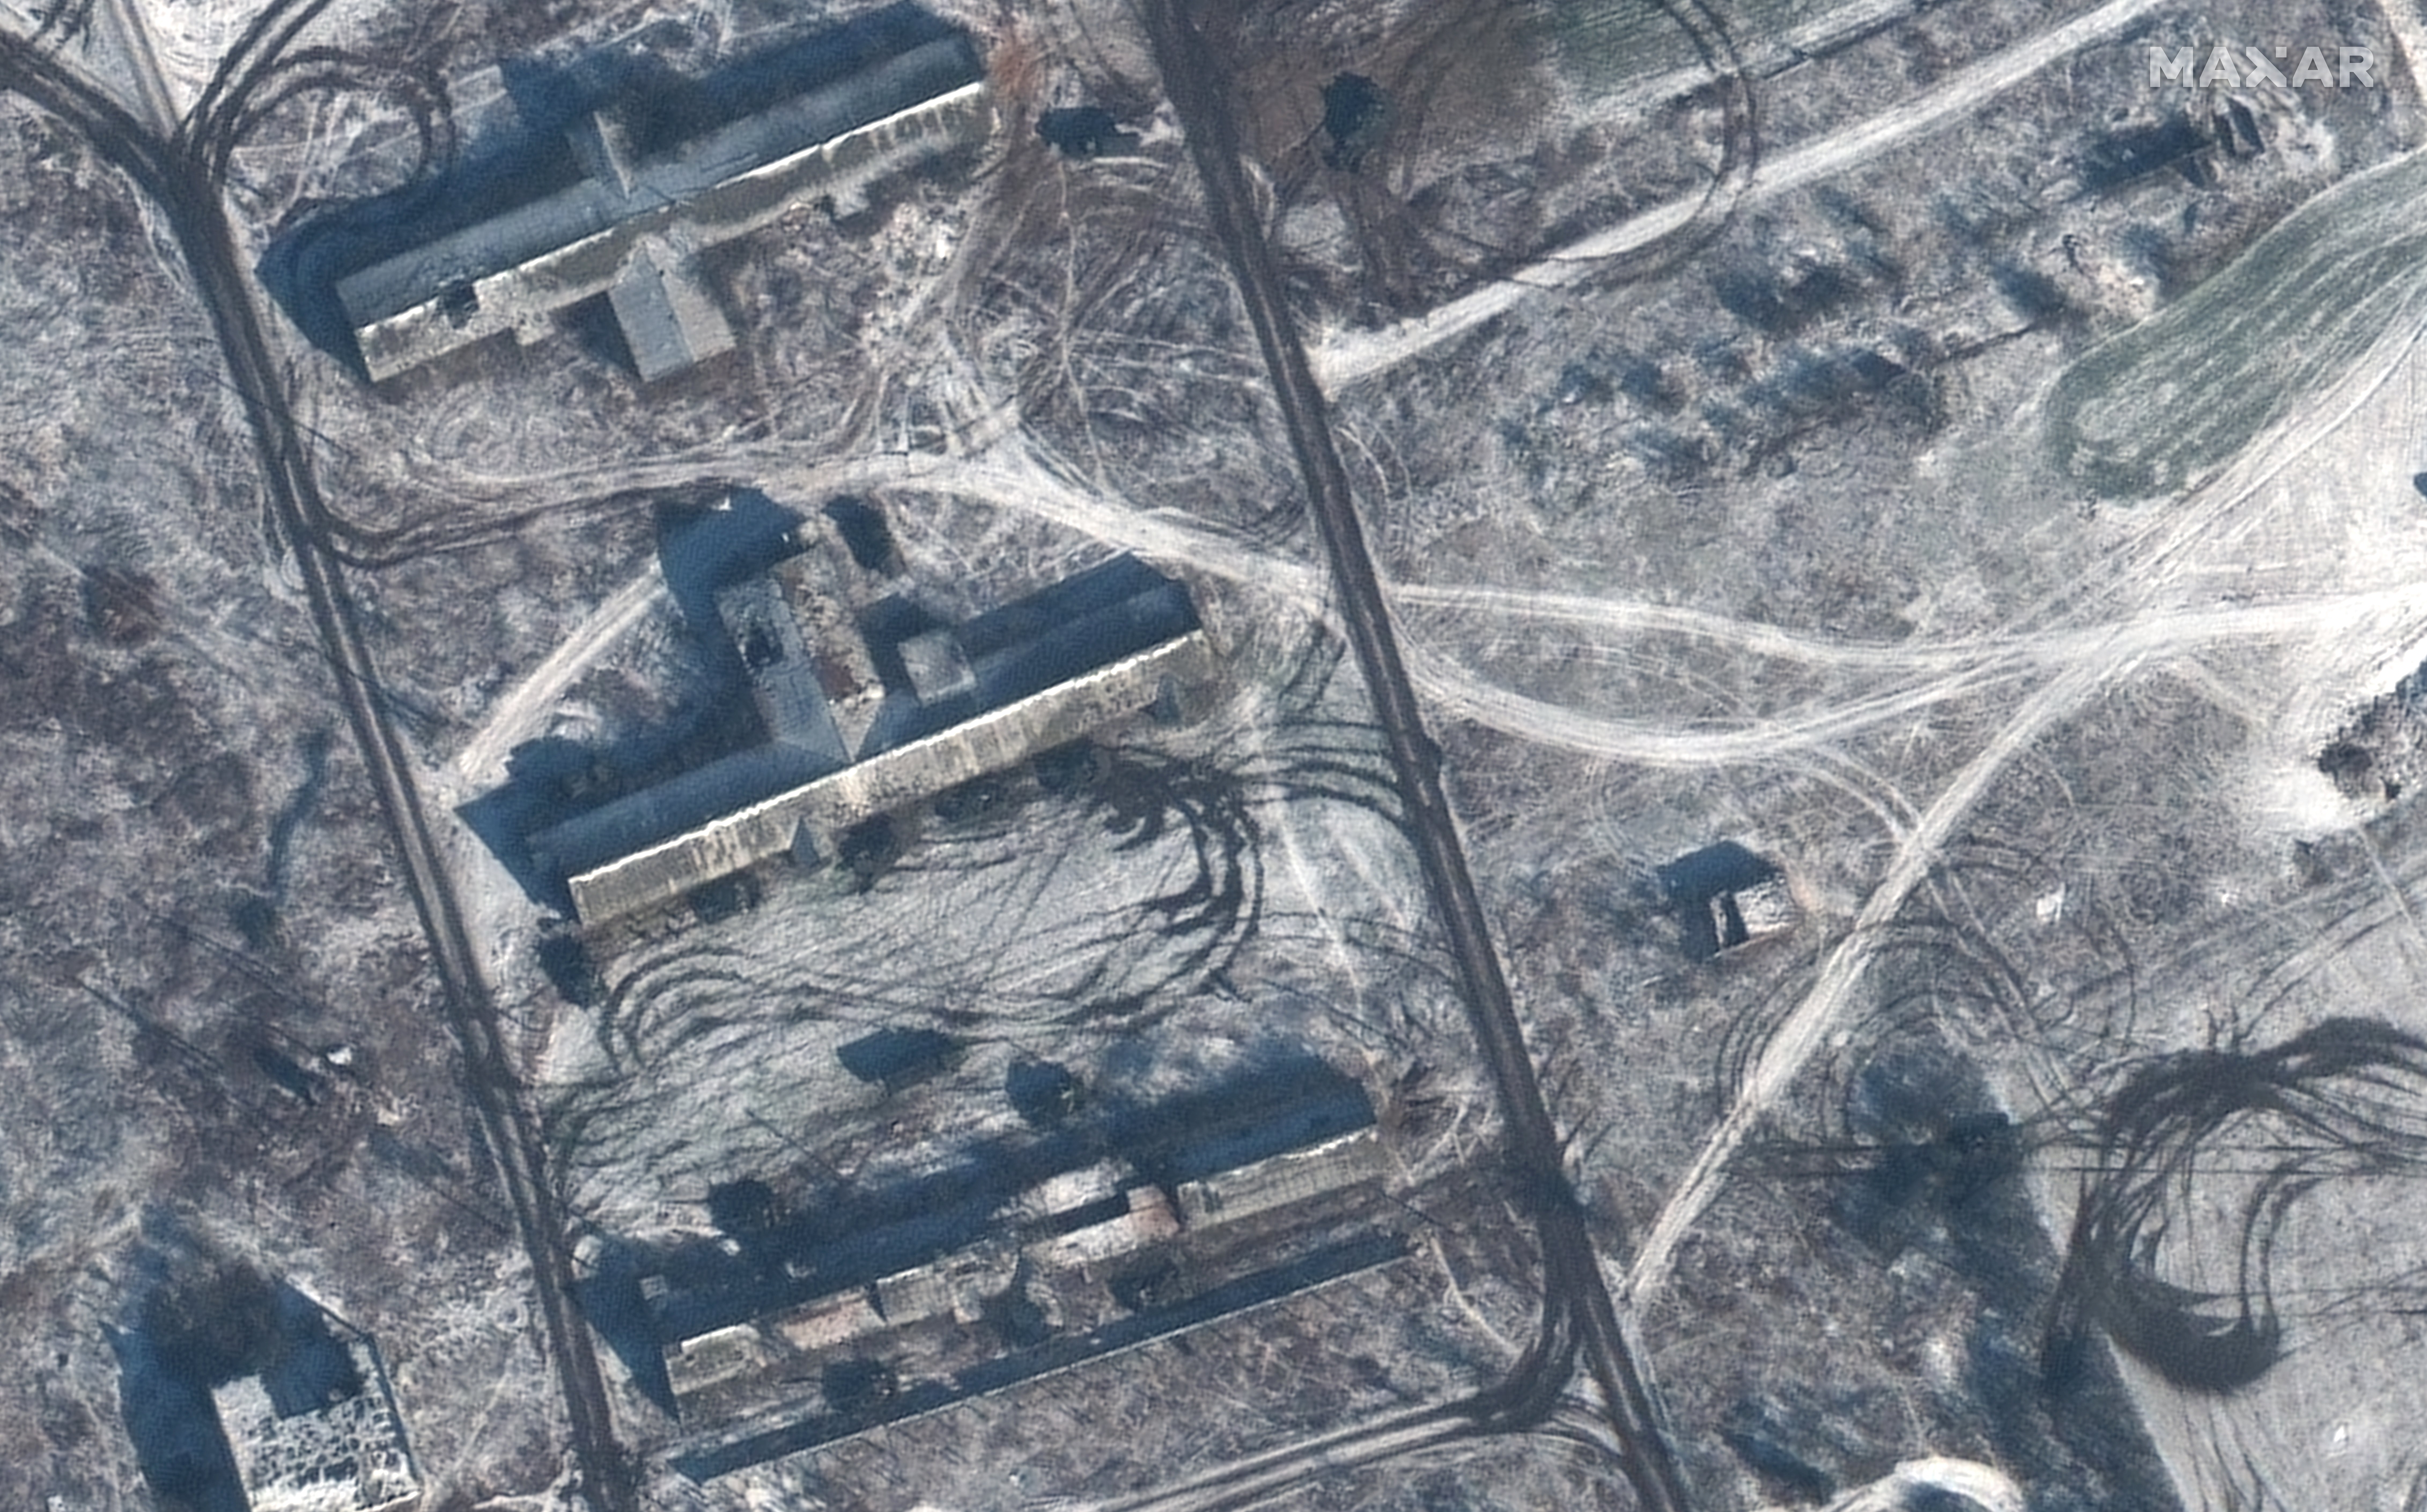 Armored vehicles positioned behind residential buildings in Krylivka, Ukraine (image captured 8 February 2023)